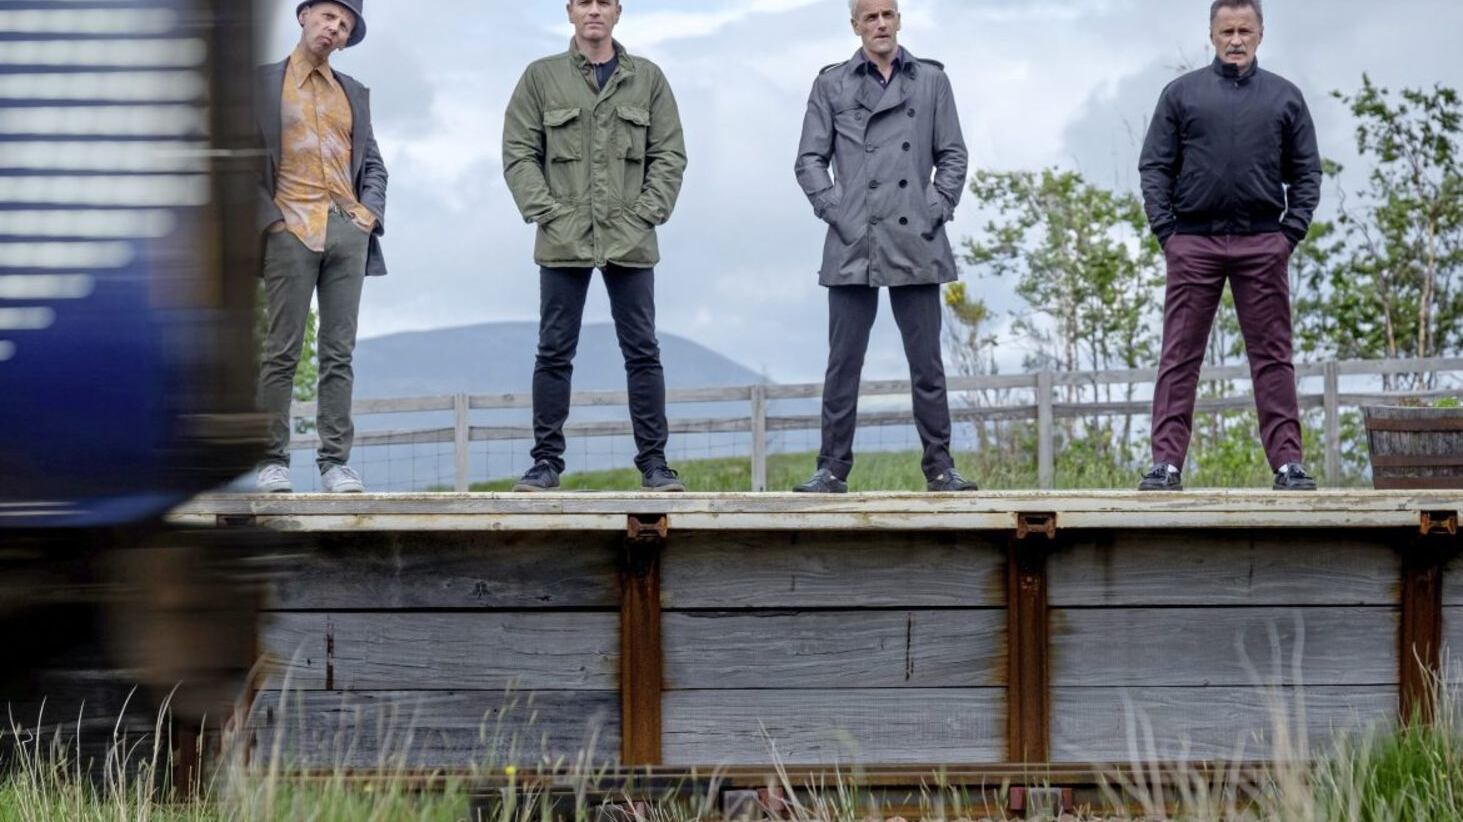 T2 Trainspotting, out at the end of this month, reunites director Danny Boyle, screenwriter John Hodge and the cast of the 1996 movie 